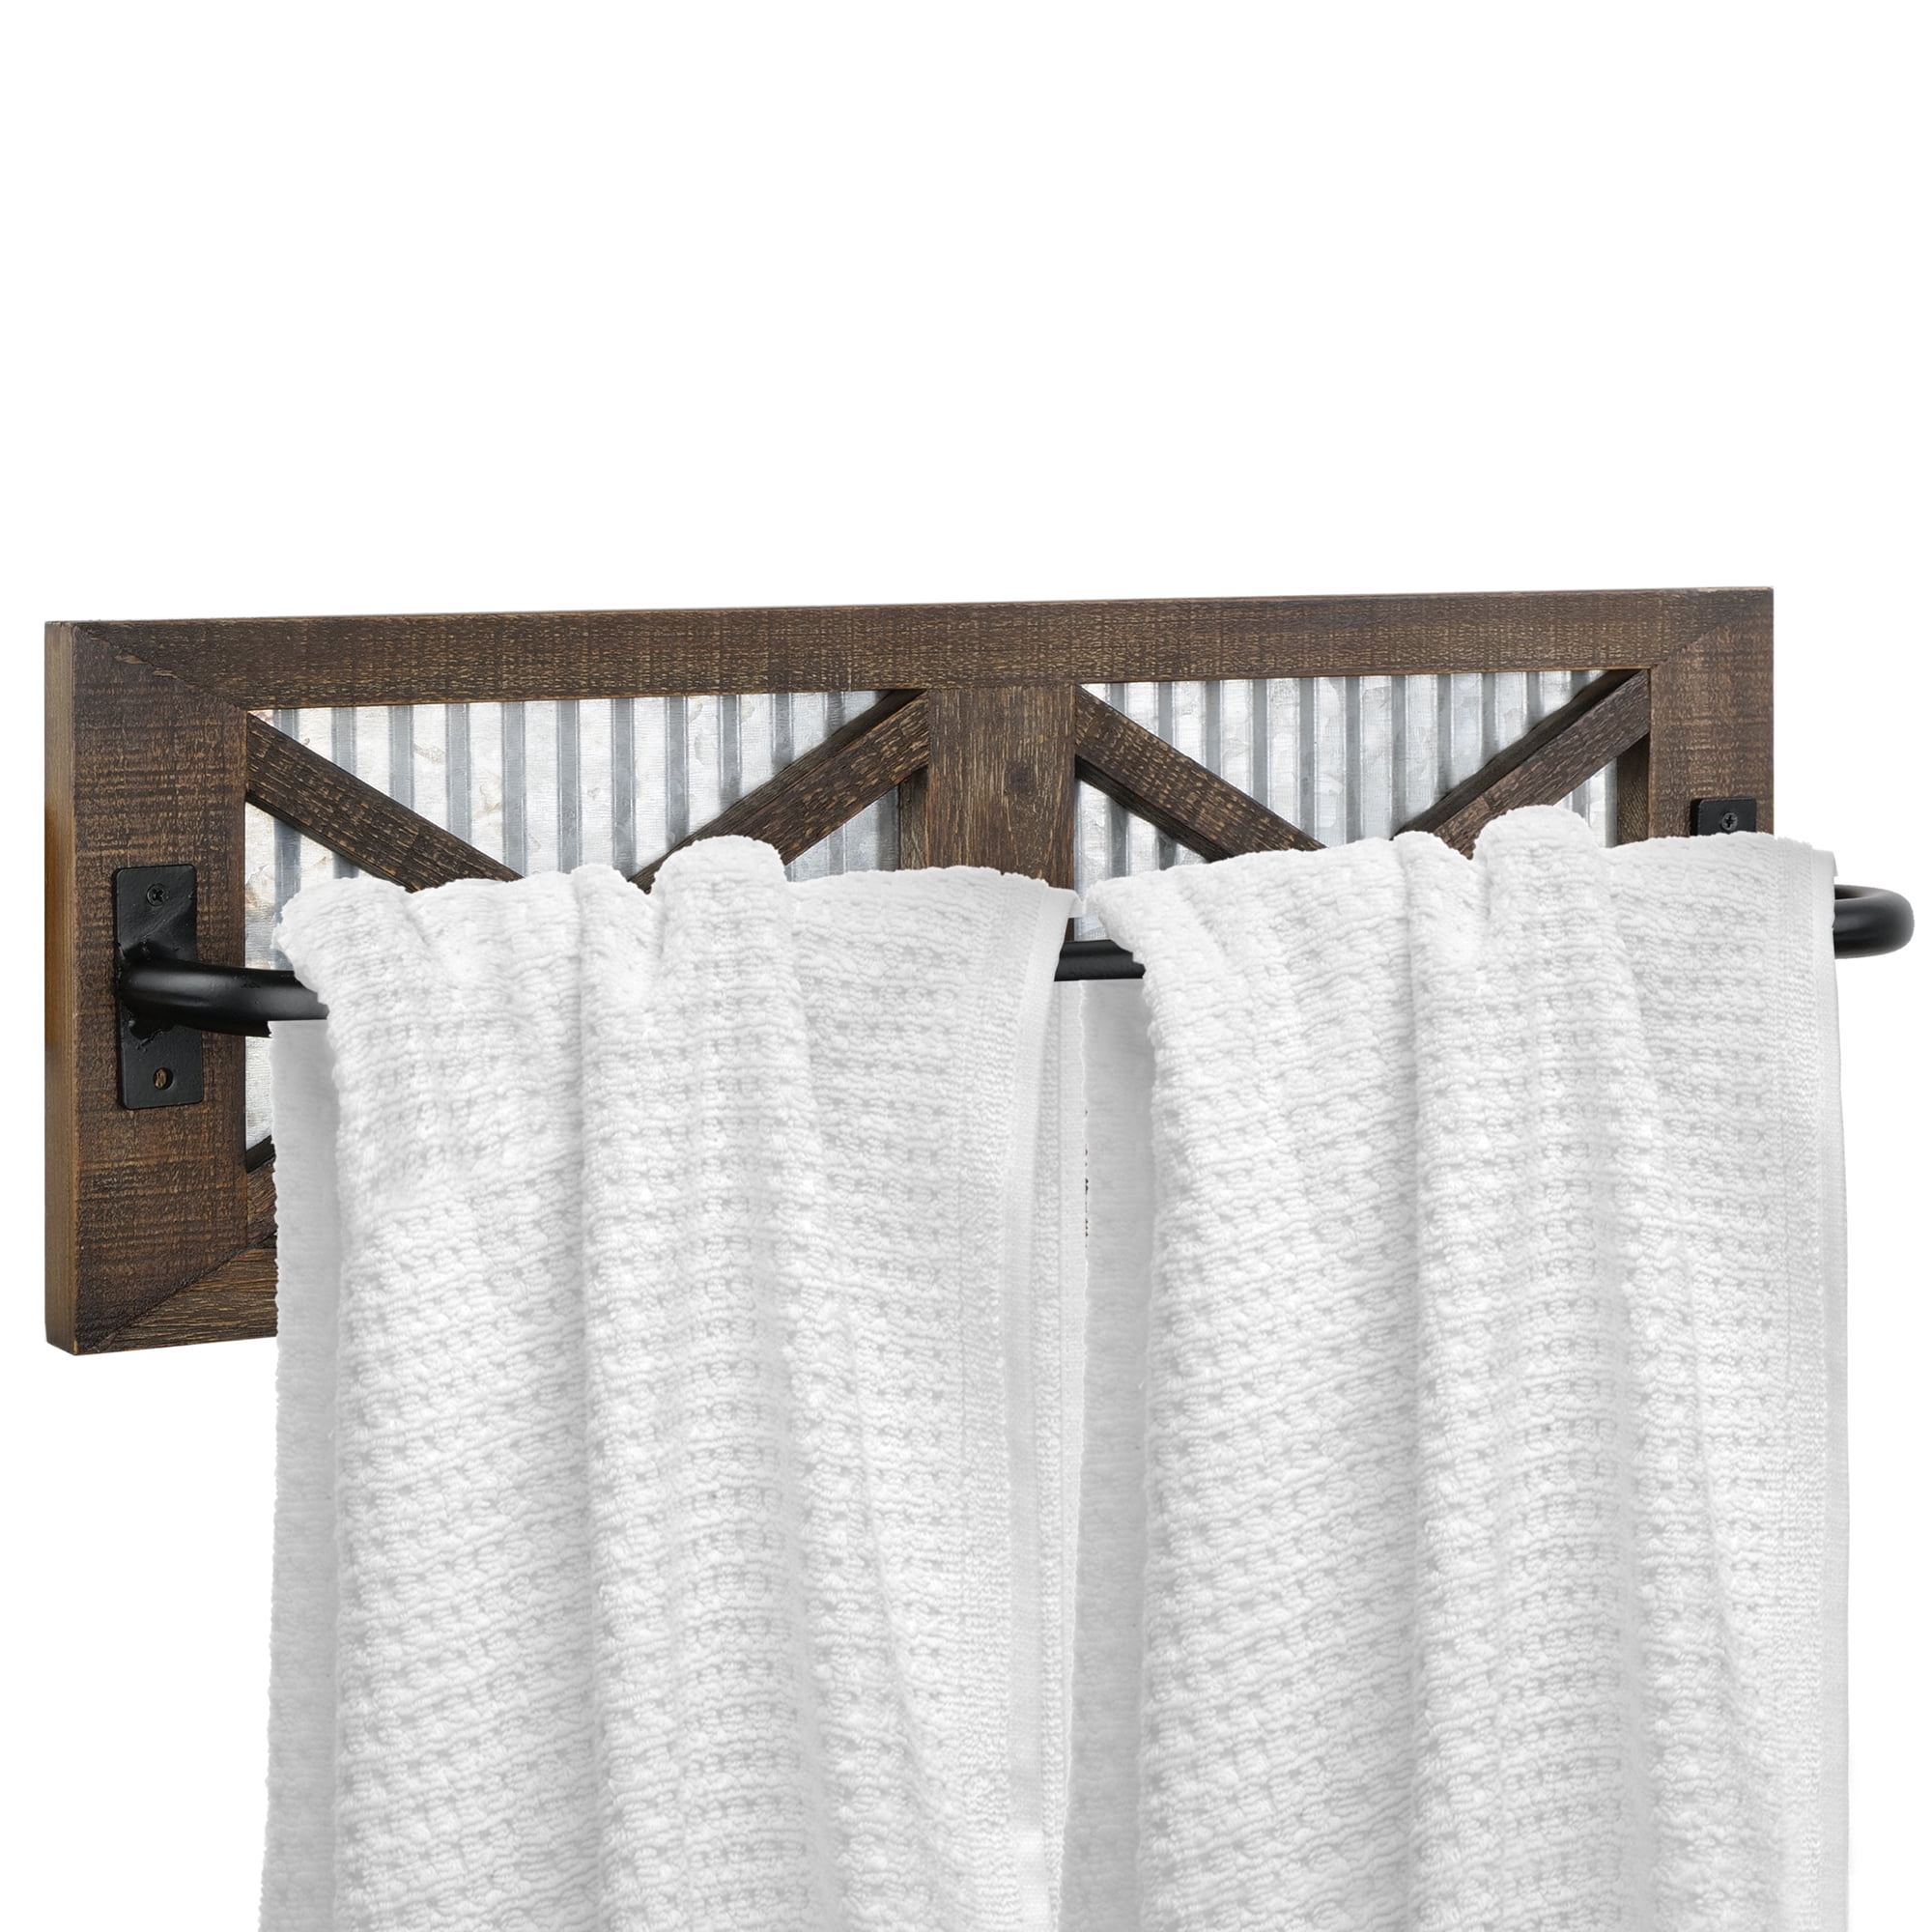 Autumn Alley Farmhouse Rustic Towel Rack Holder - Wood Towel Rack -  Farmhouse Towel Holder for Rustic Bathroom and Farmhouse Kitchen Style  D?cor - 18 Wall Mounted, Set of 2, Rustic Brown 